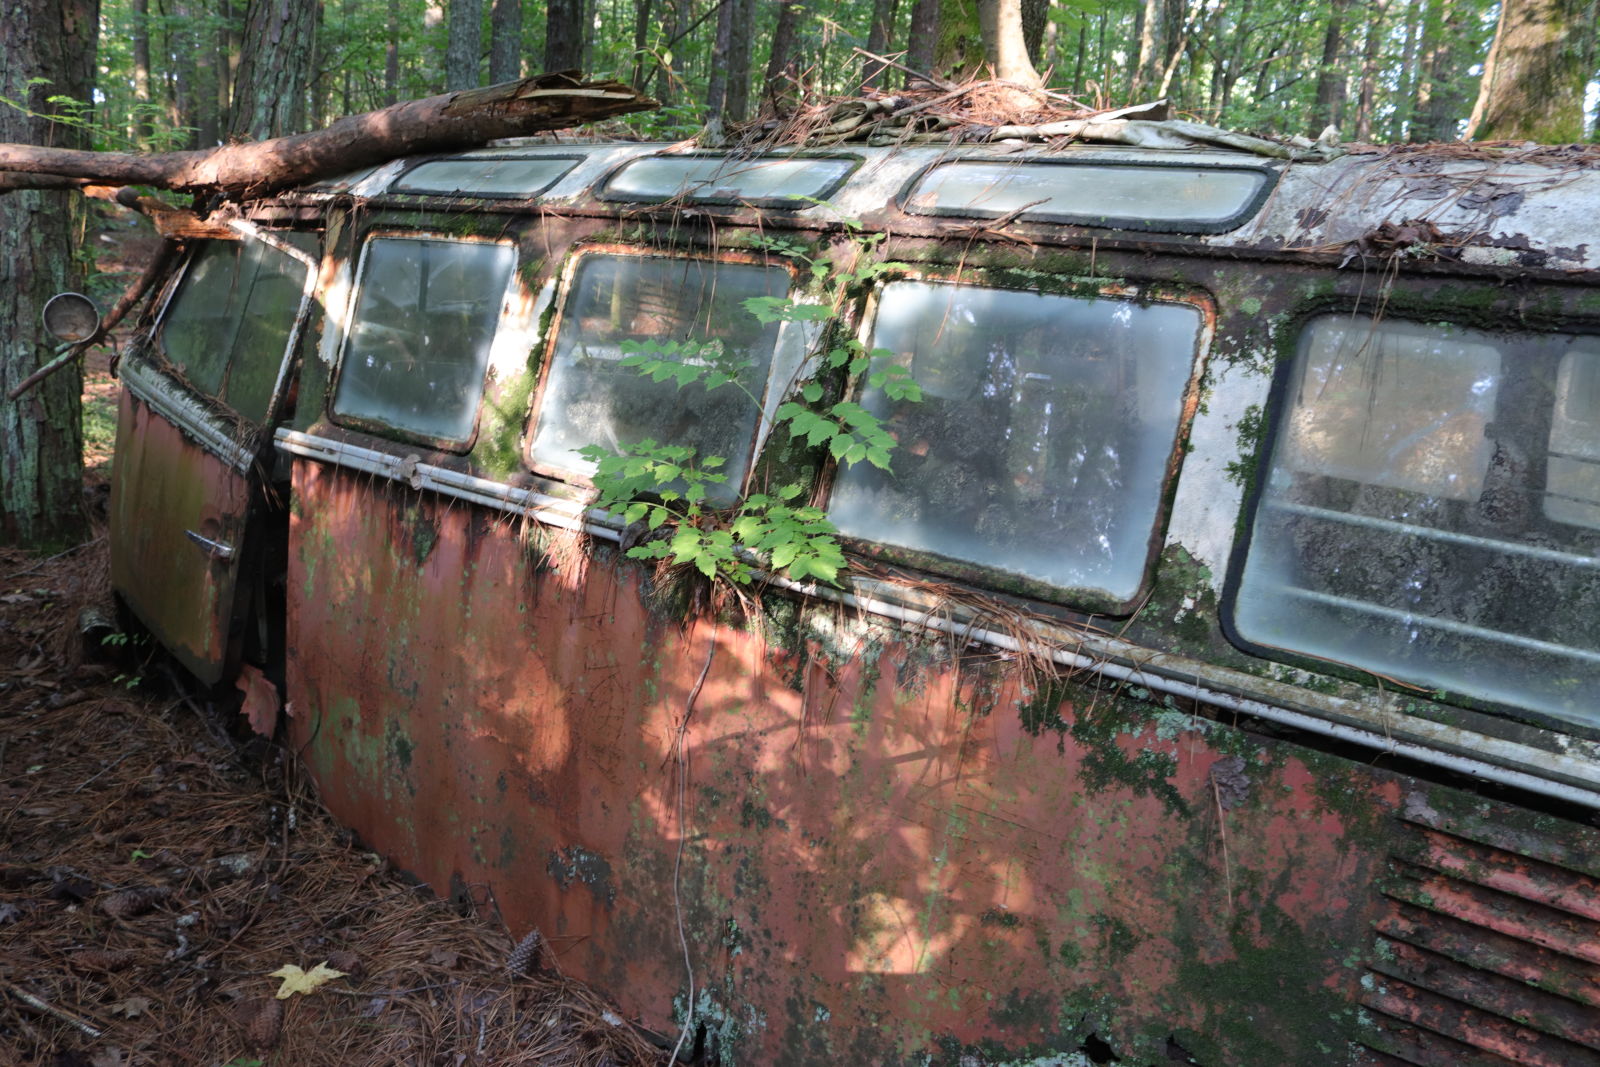 Illustration for article titled Spotted: Rare Volkswagen In The Woods